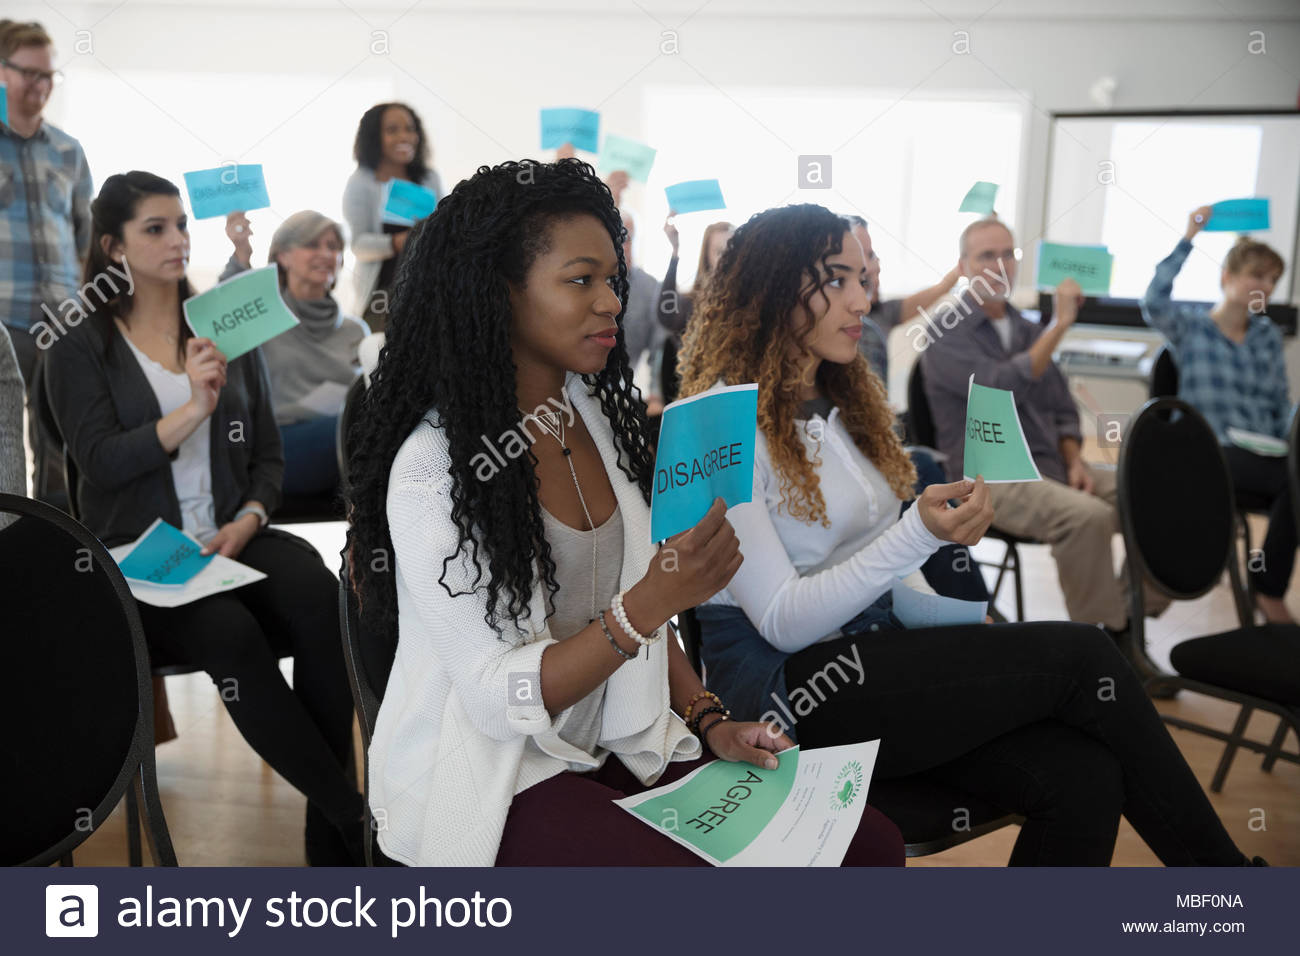 Audience voting at town hall meeting Stock Photo